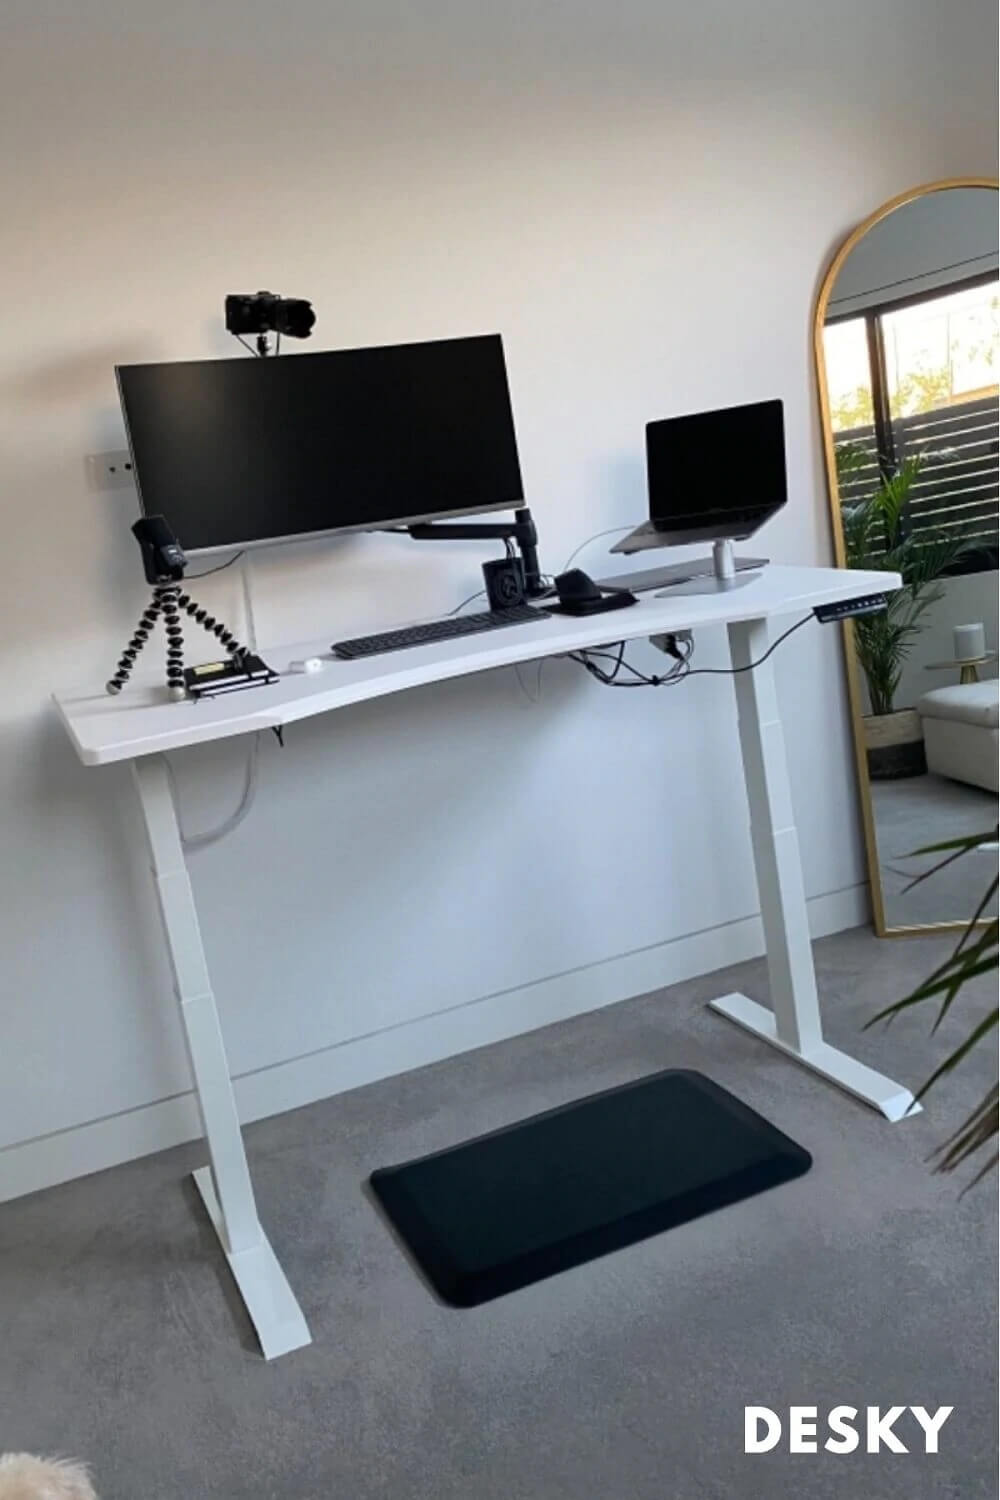 Anti-Fatigue mats - How to use rubber mats with a standing desk.